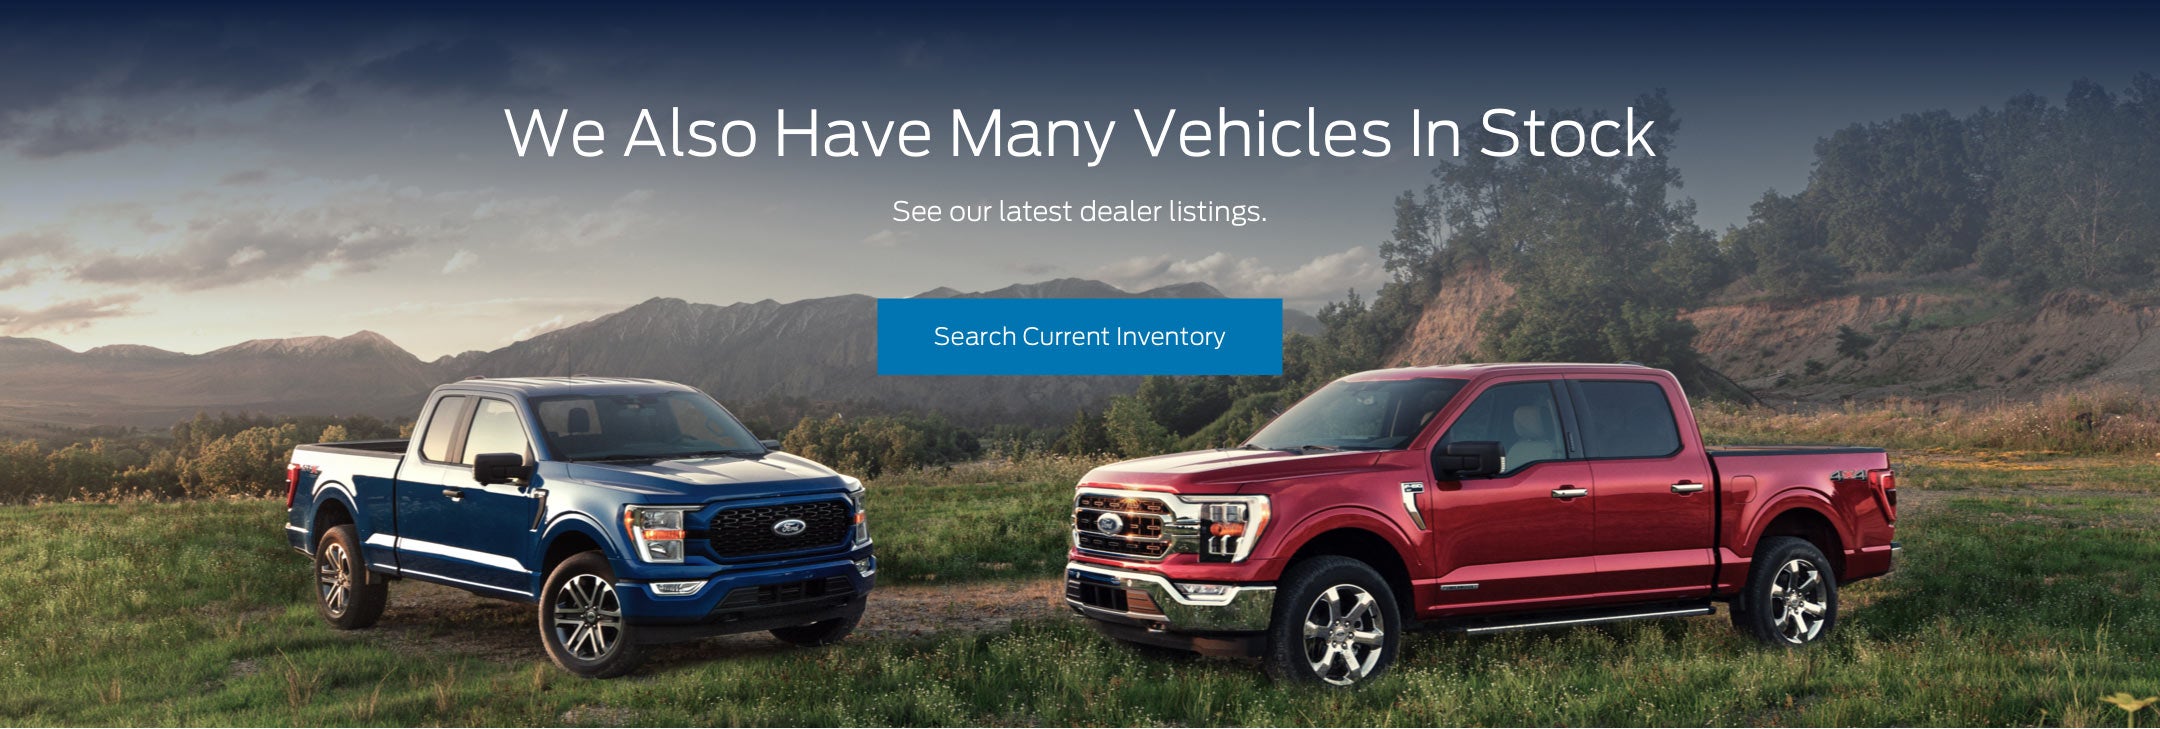 Ford vehicles in stock | Asheboro Ford in Asheboro NC